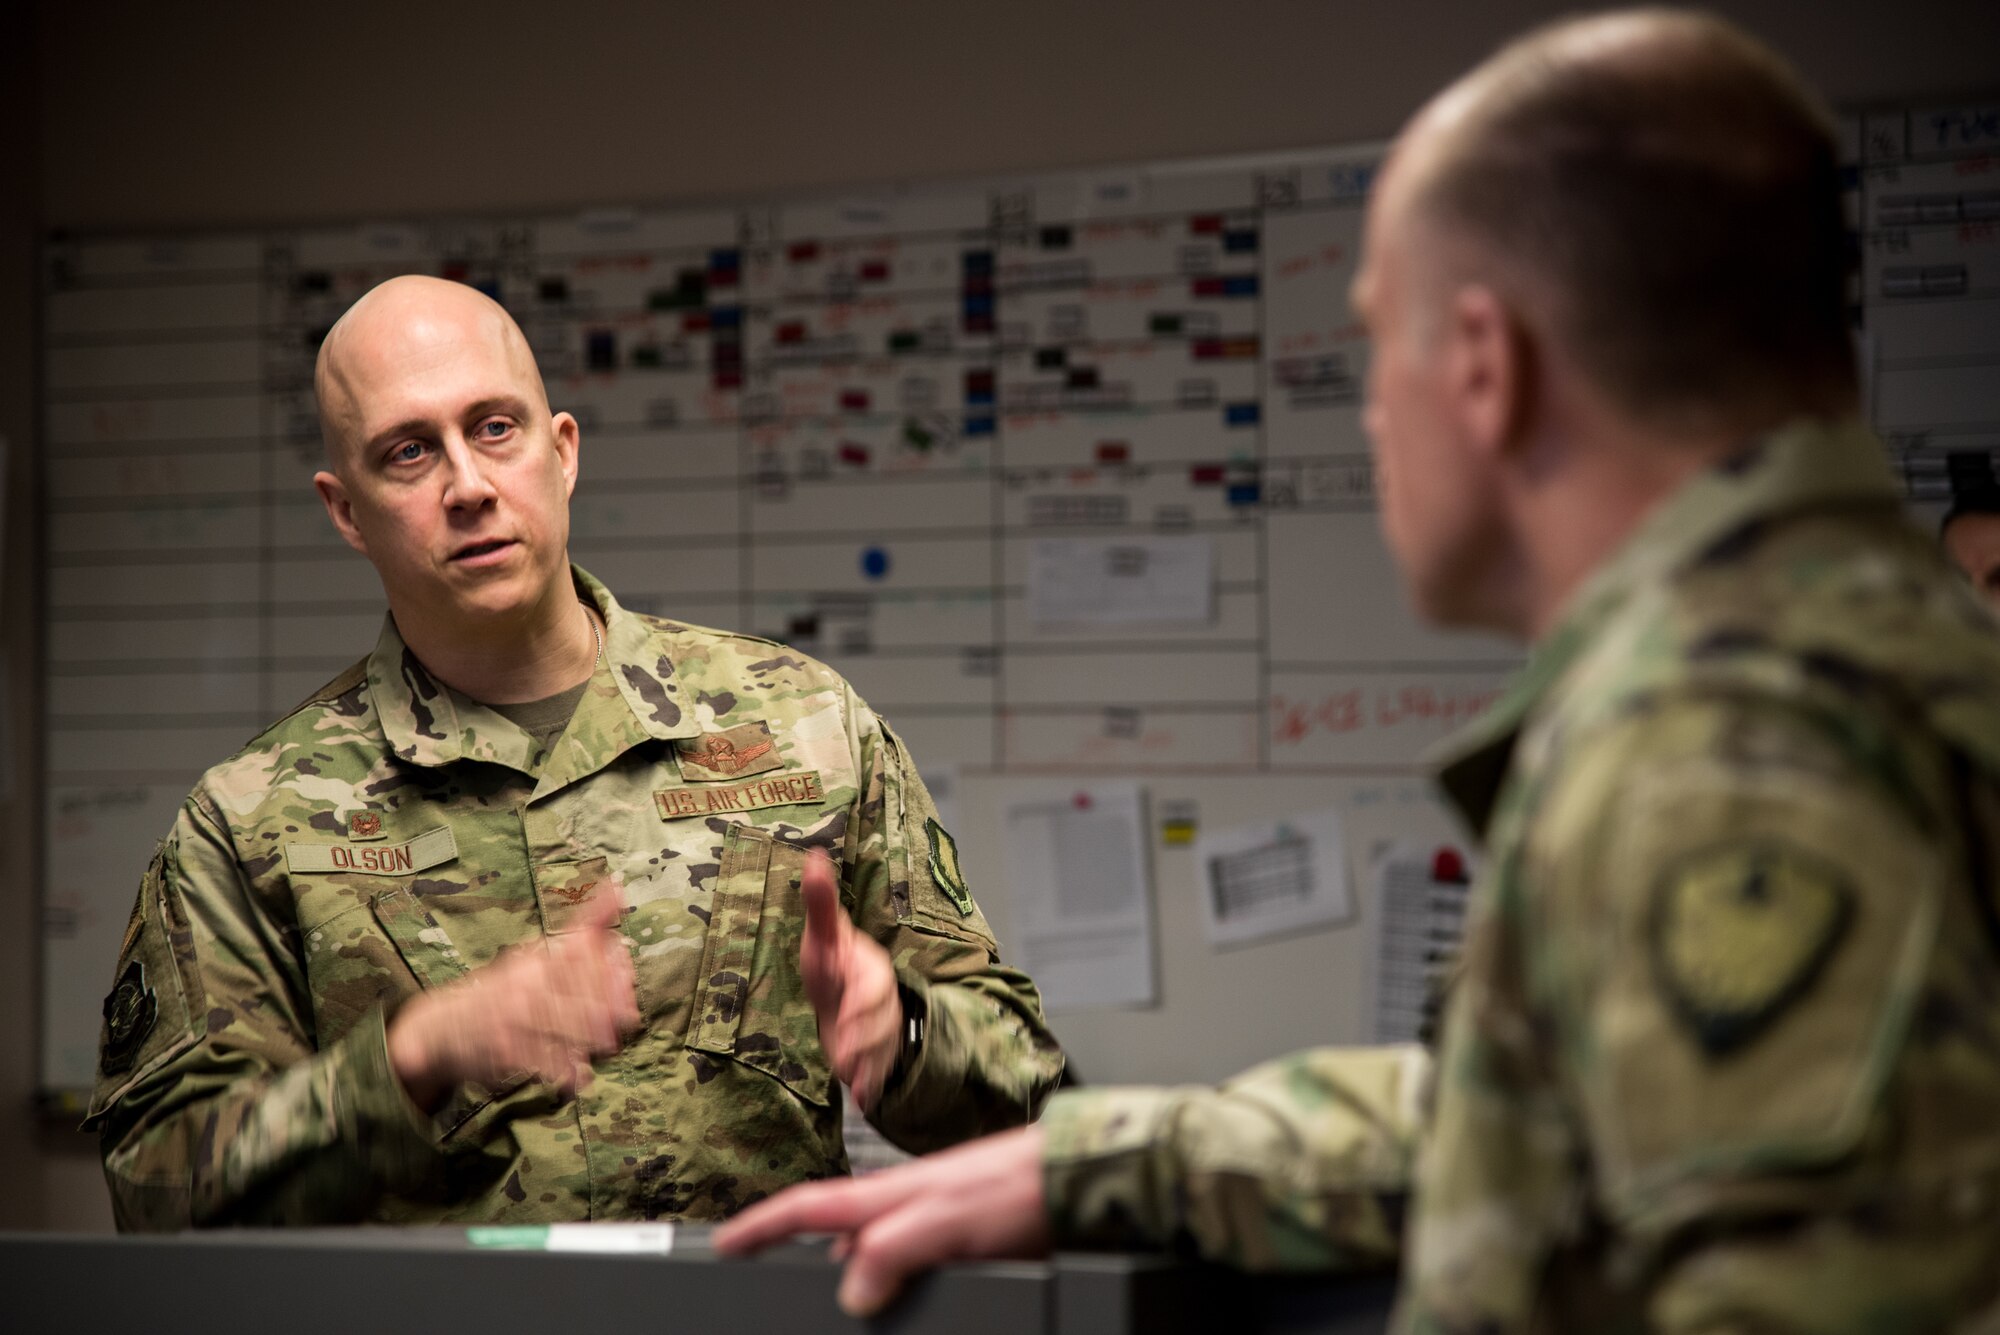 Col. Josh Olson, 22 Air Refueling Wing commander, speaks to U.S. Army Gen. Stephen R. Lyons, U.S. Transportation Command commander, Feb. 21, 2019, at McConnell Air Force Base, Kan. During the visit, Lyons was briefed on McConnell’s operations, readiness and what the installation provides to the USTRANSCOM. (U.S. Air Force photo by Airman 1st Class Alan Ricker)